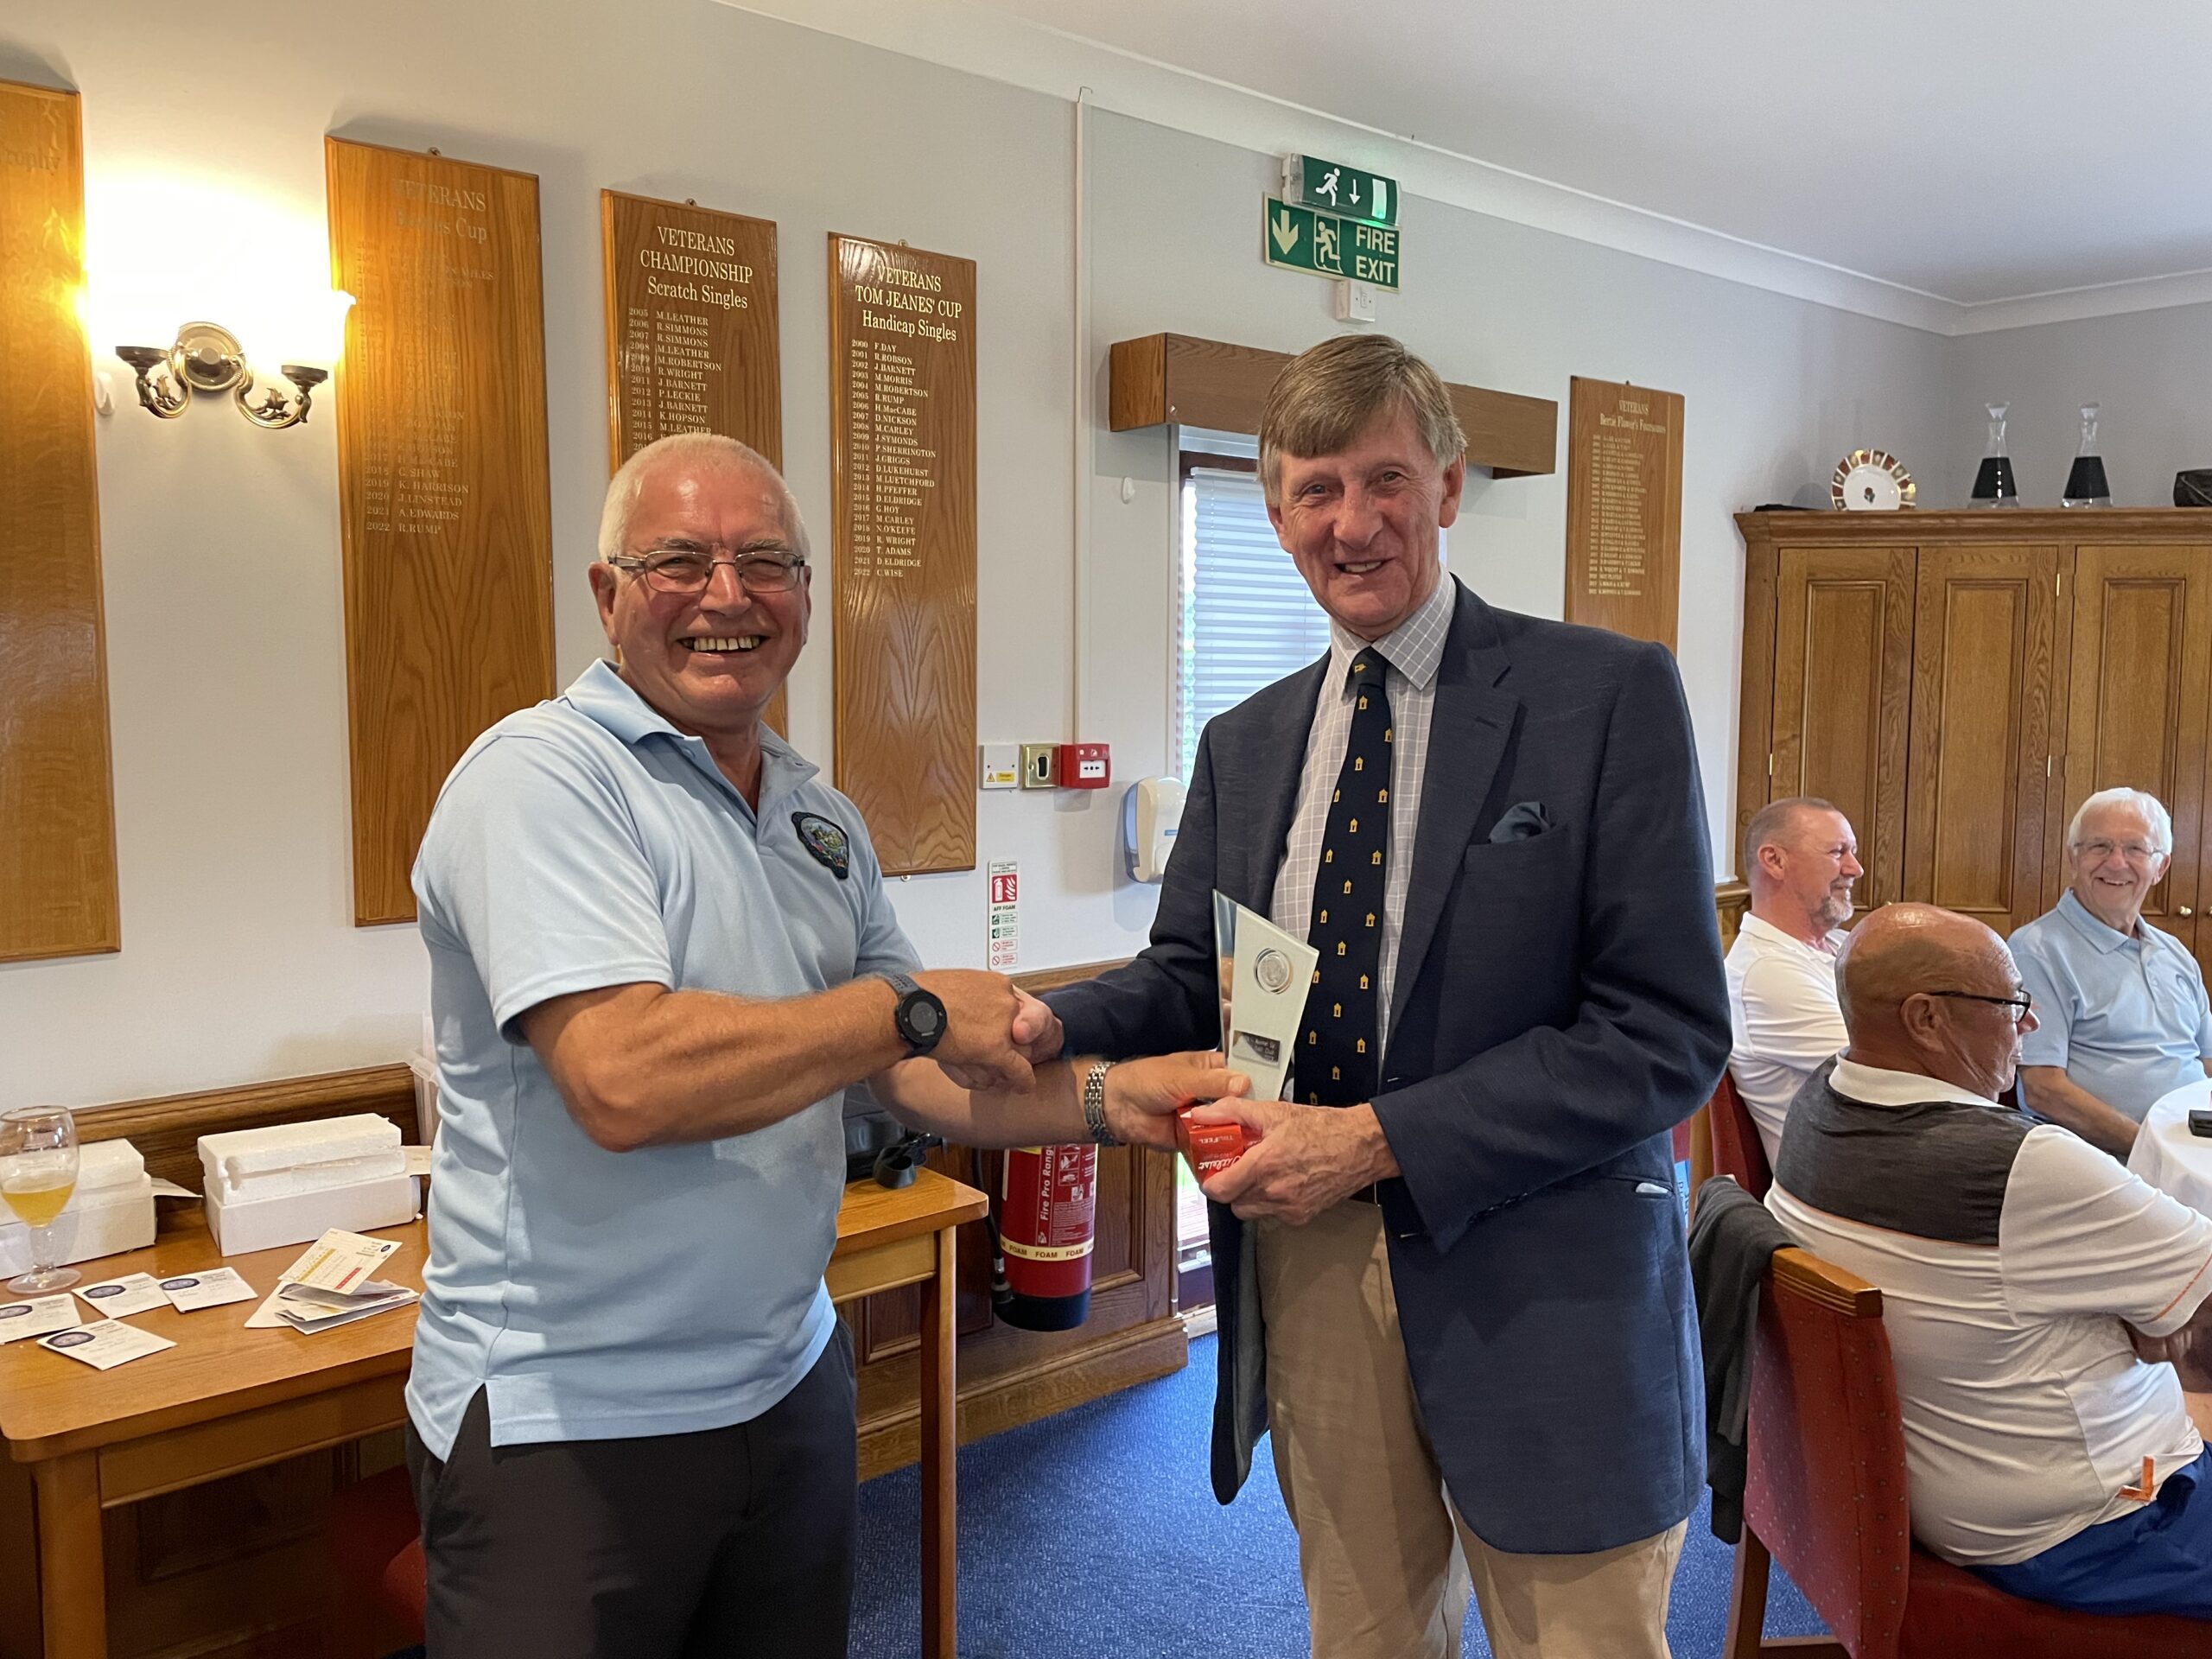 Dave Kirby (Trinity Lodge) Runner Up in the Geoffrey Gordon Dearing Bowl